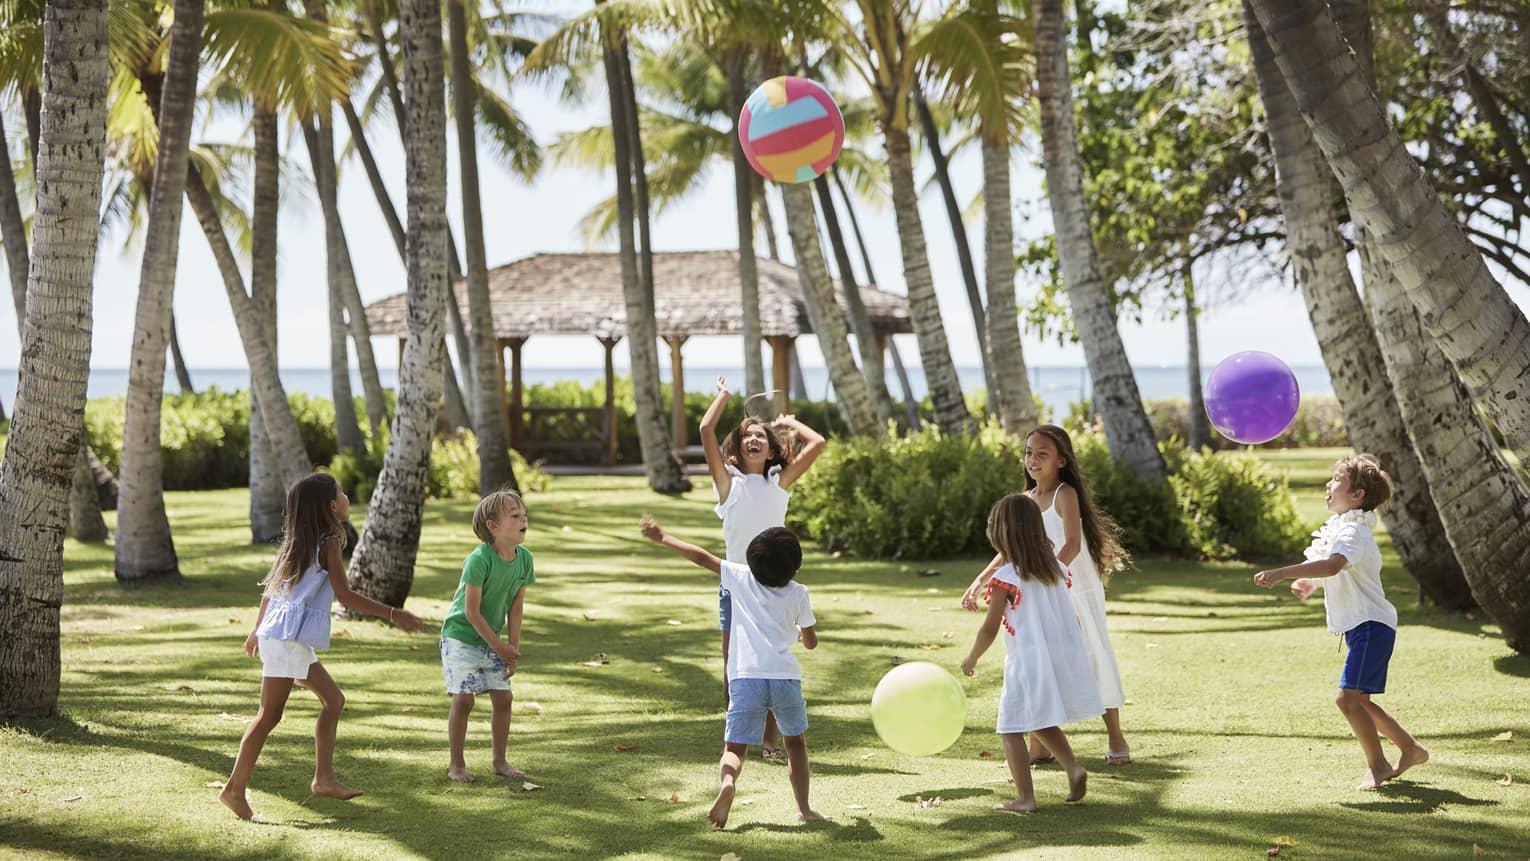 Group of children play with large colourful balls on green lawn under palm trees